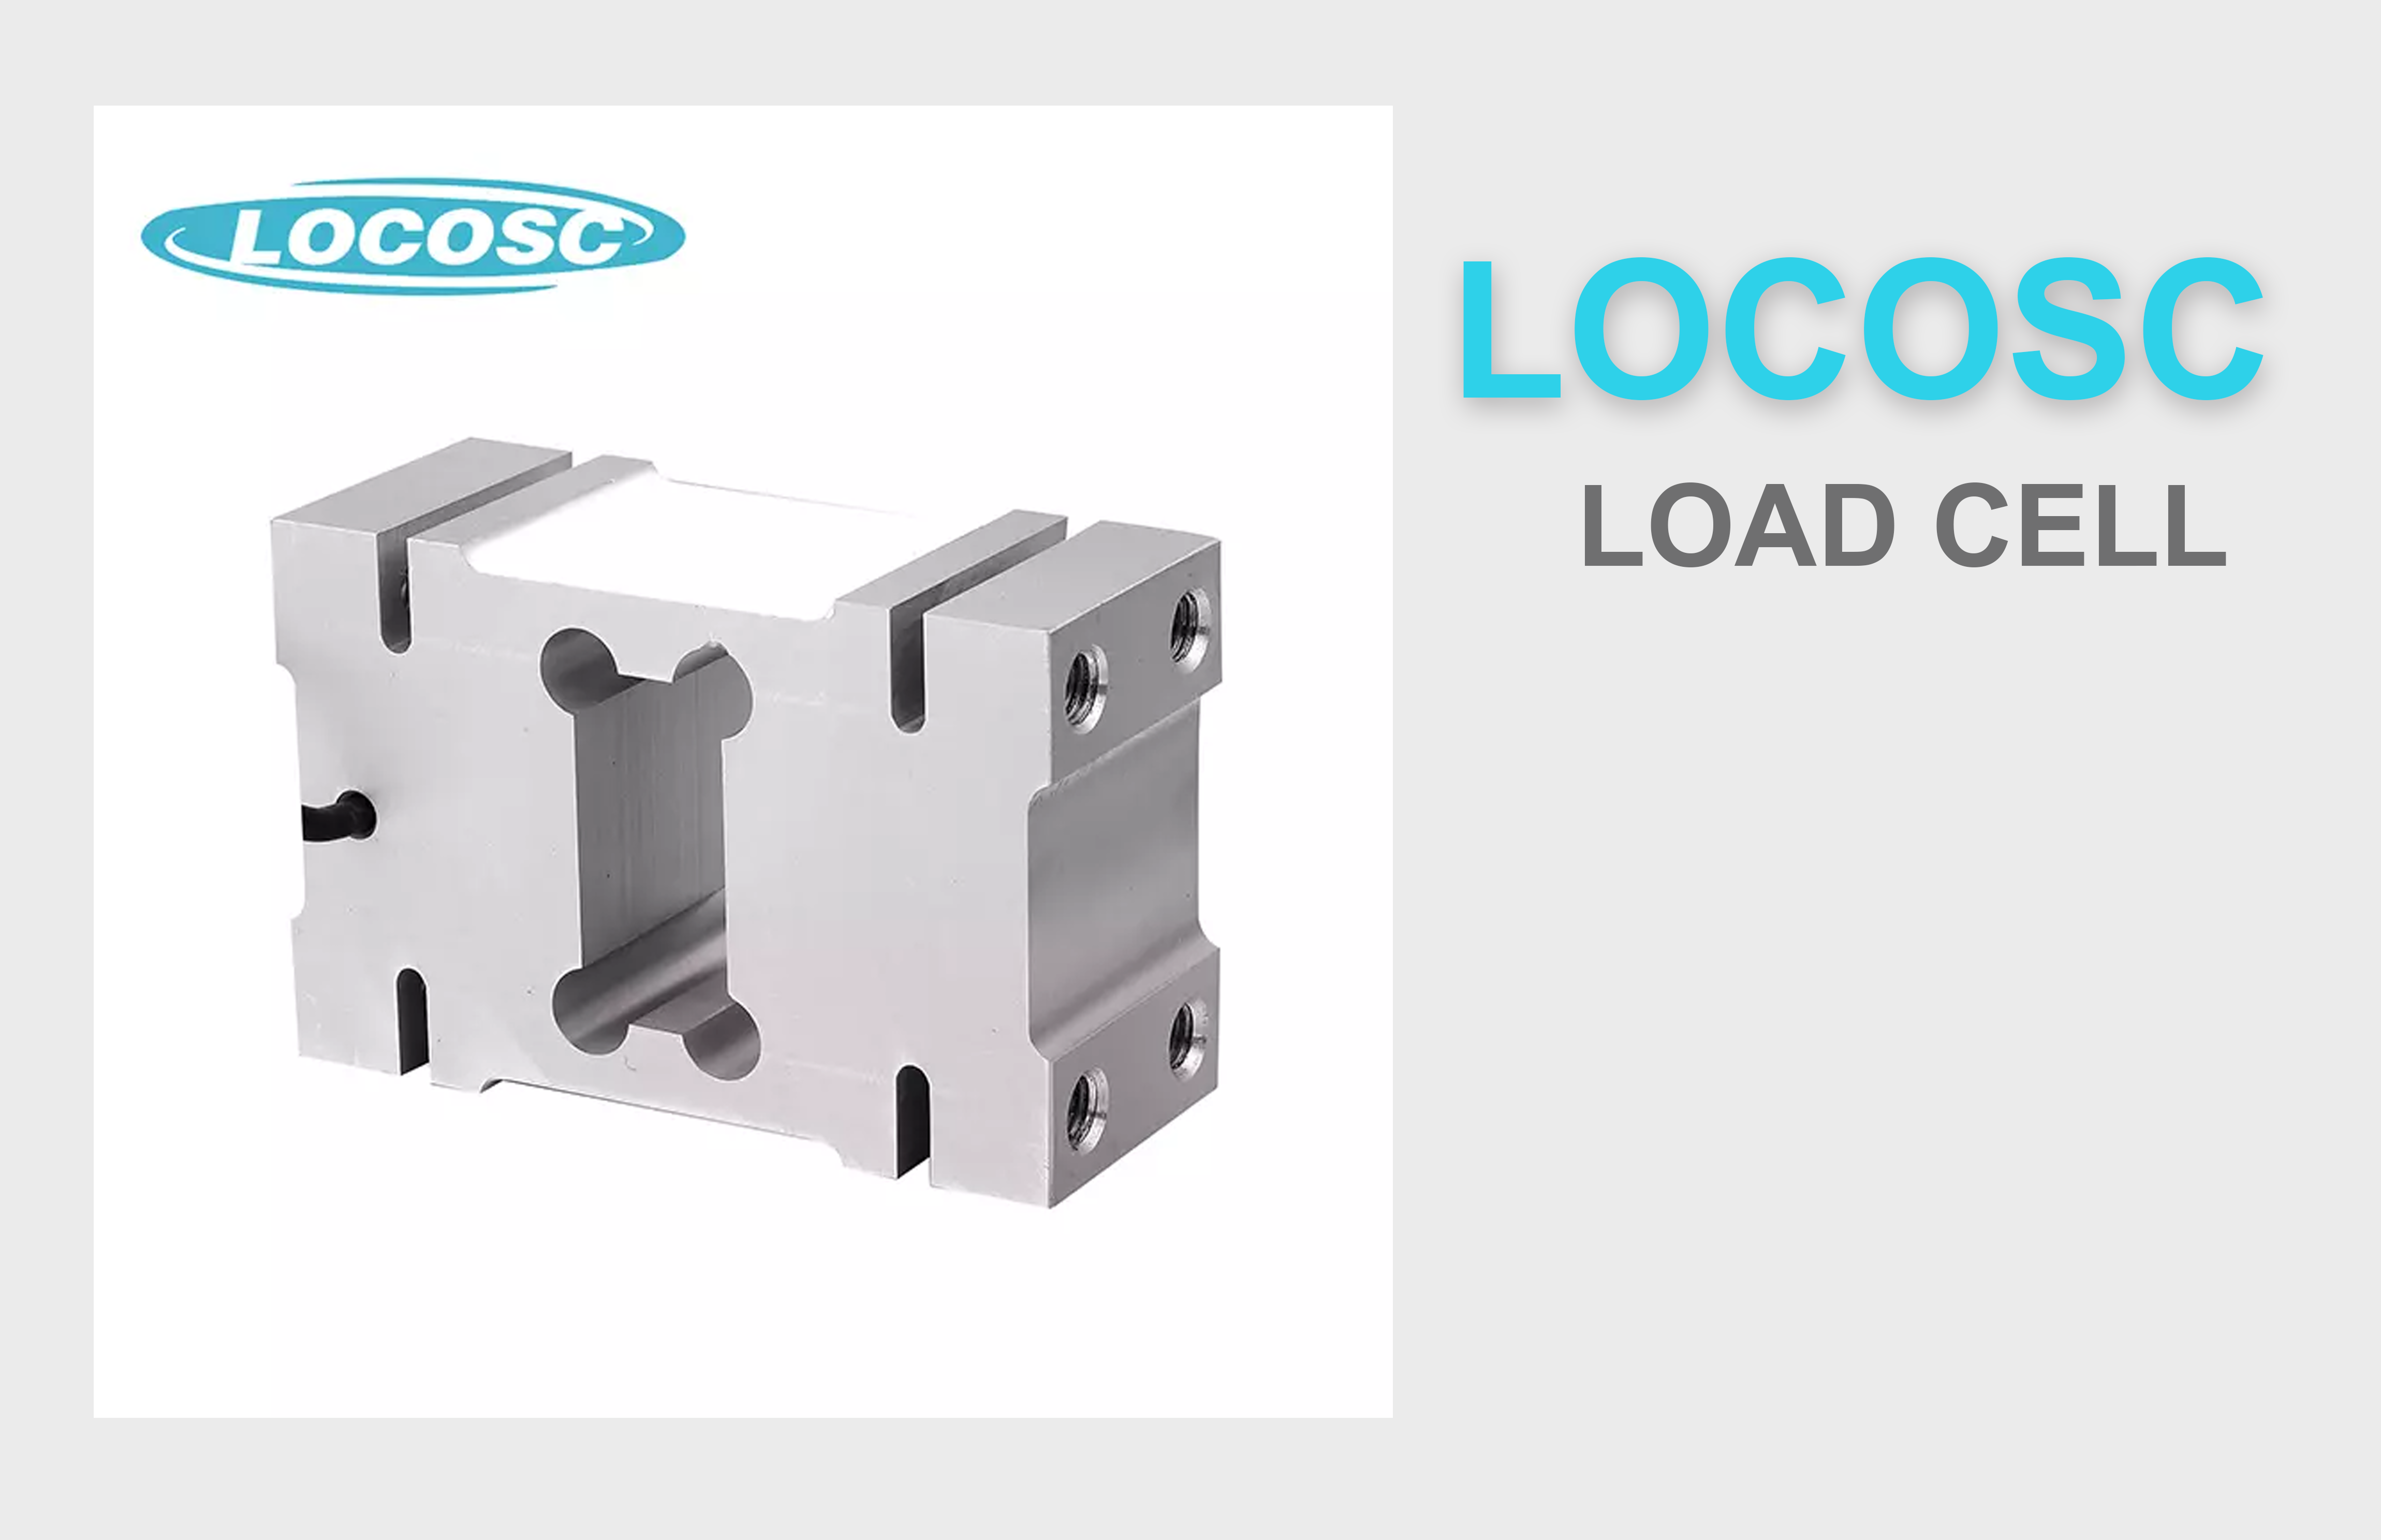 LOCOSC LOAD CELL